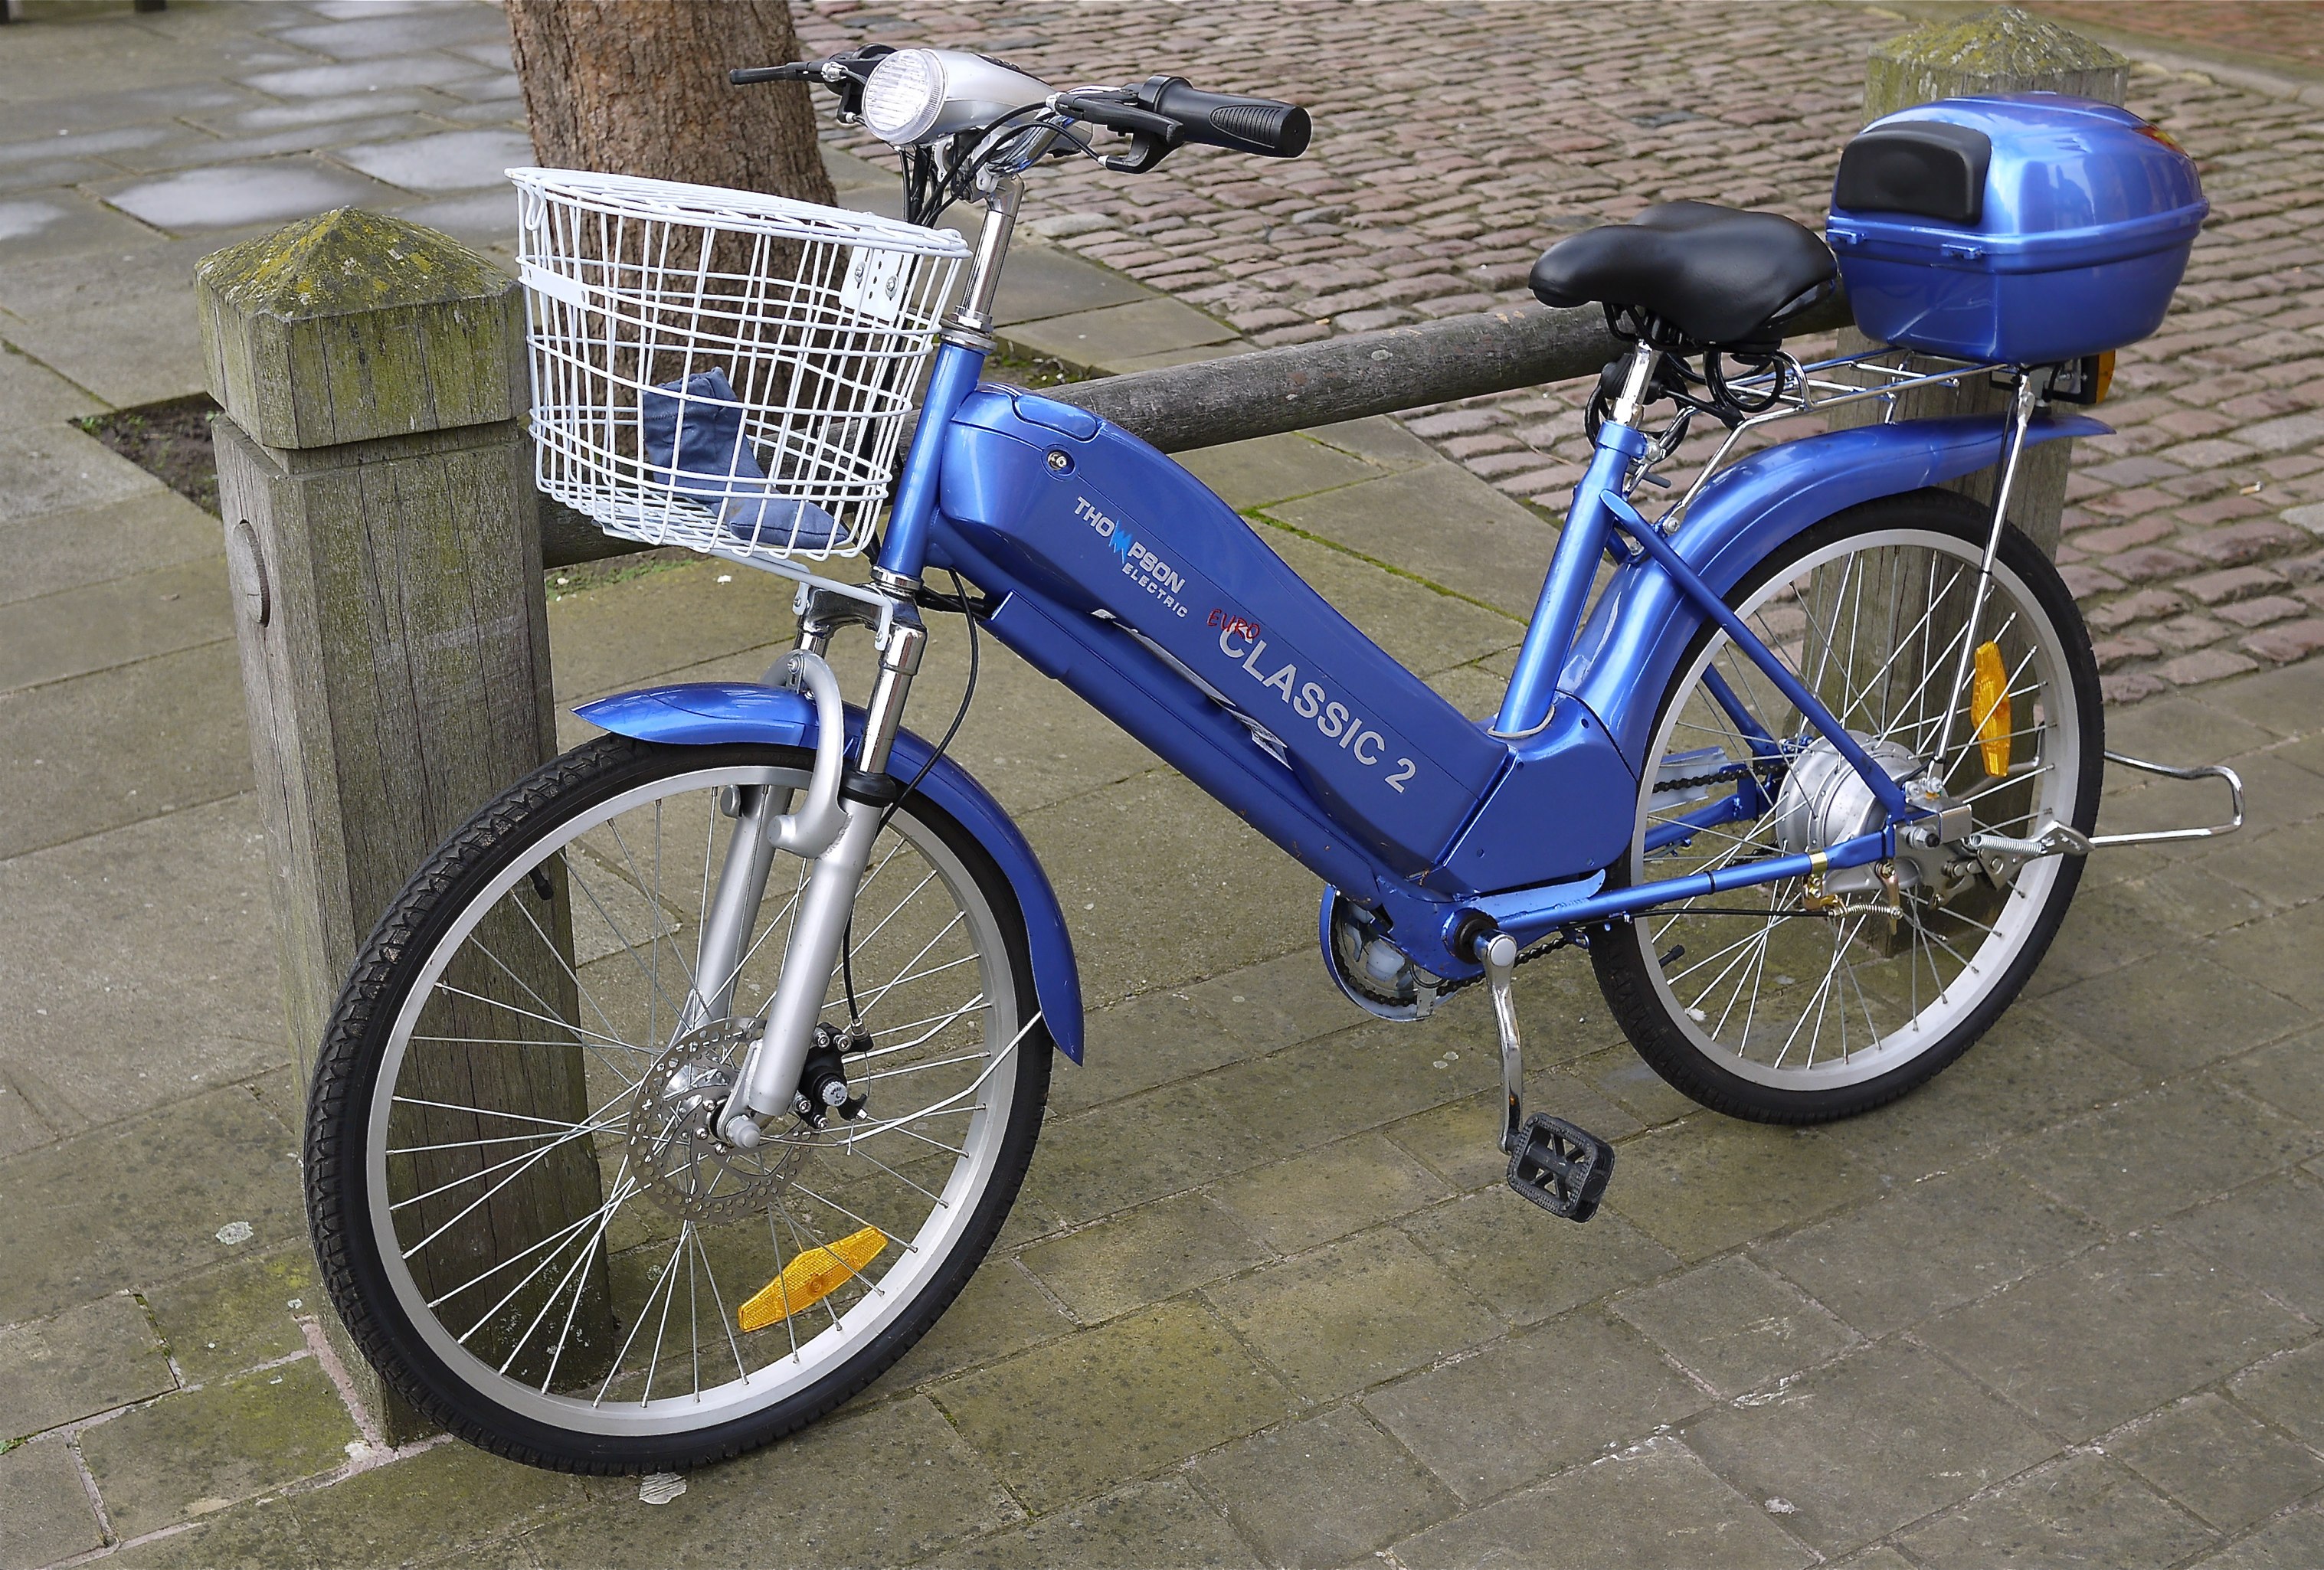 Thompson Euro Classic 2 Electric Bicycle - Flickr - mick - Lumix